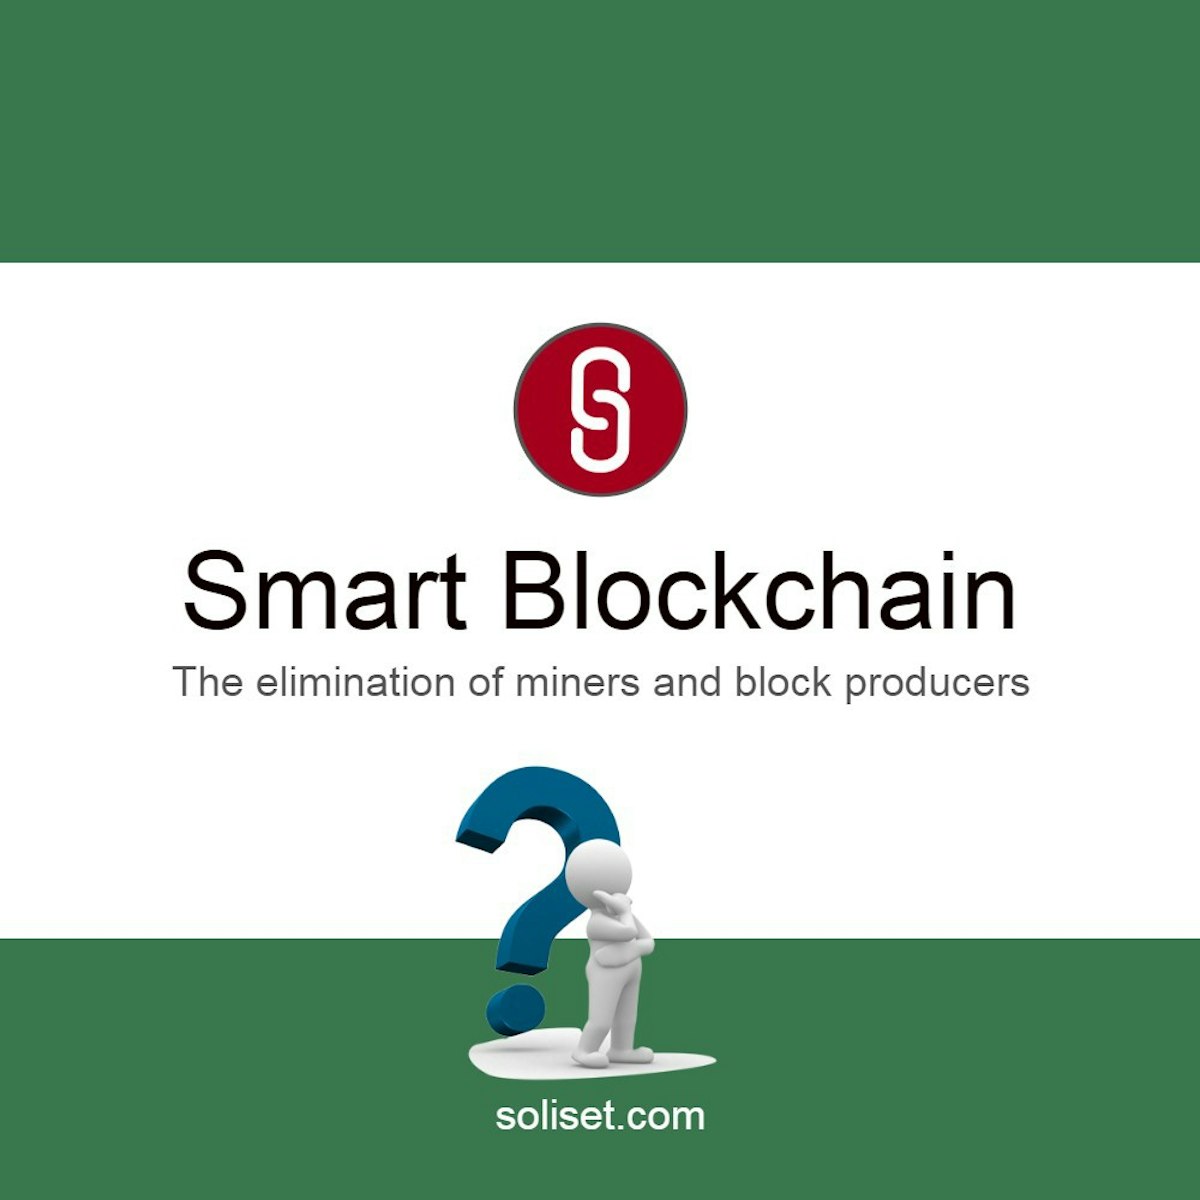 featured image - What is Smart Blockchain?